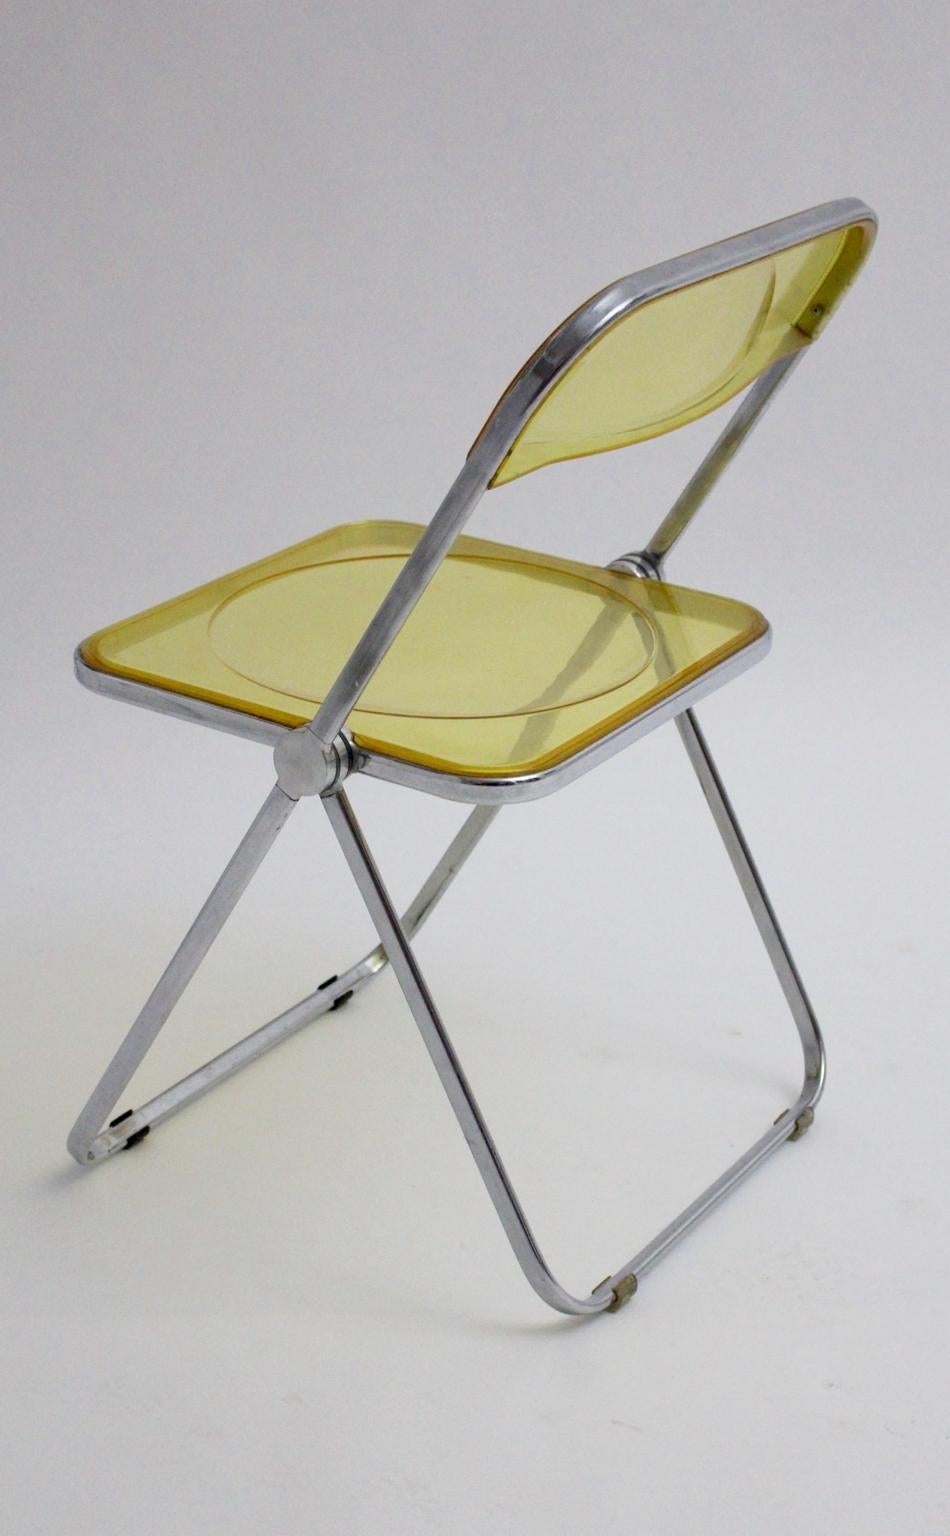 yellow foldable chair